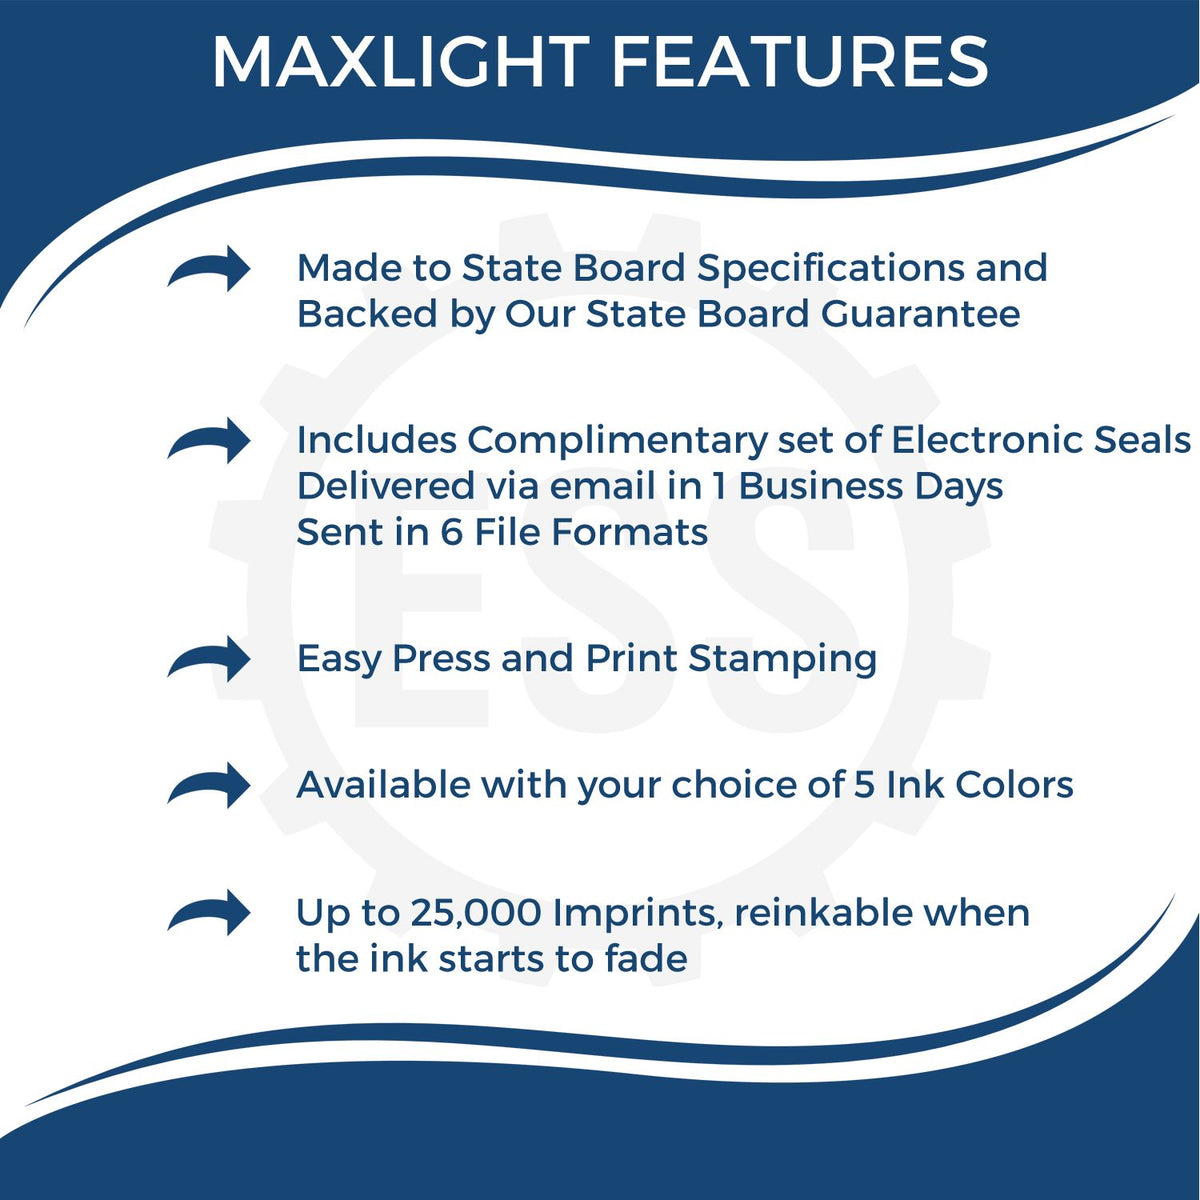 A picture of an infographic highlighting the selling points for the Premium MaxLight Pre-Inked Arizona Engineering Stamp